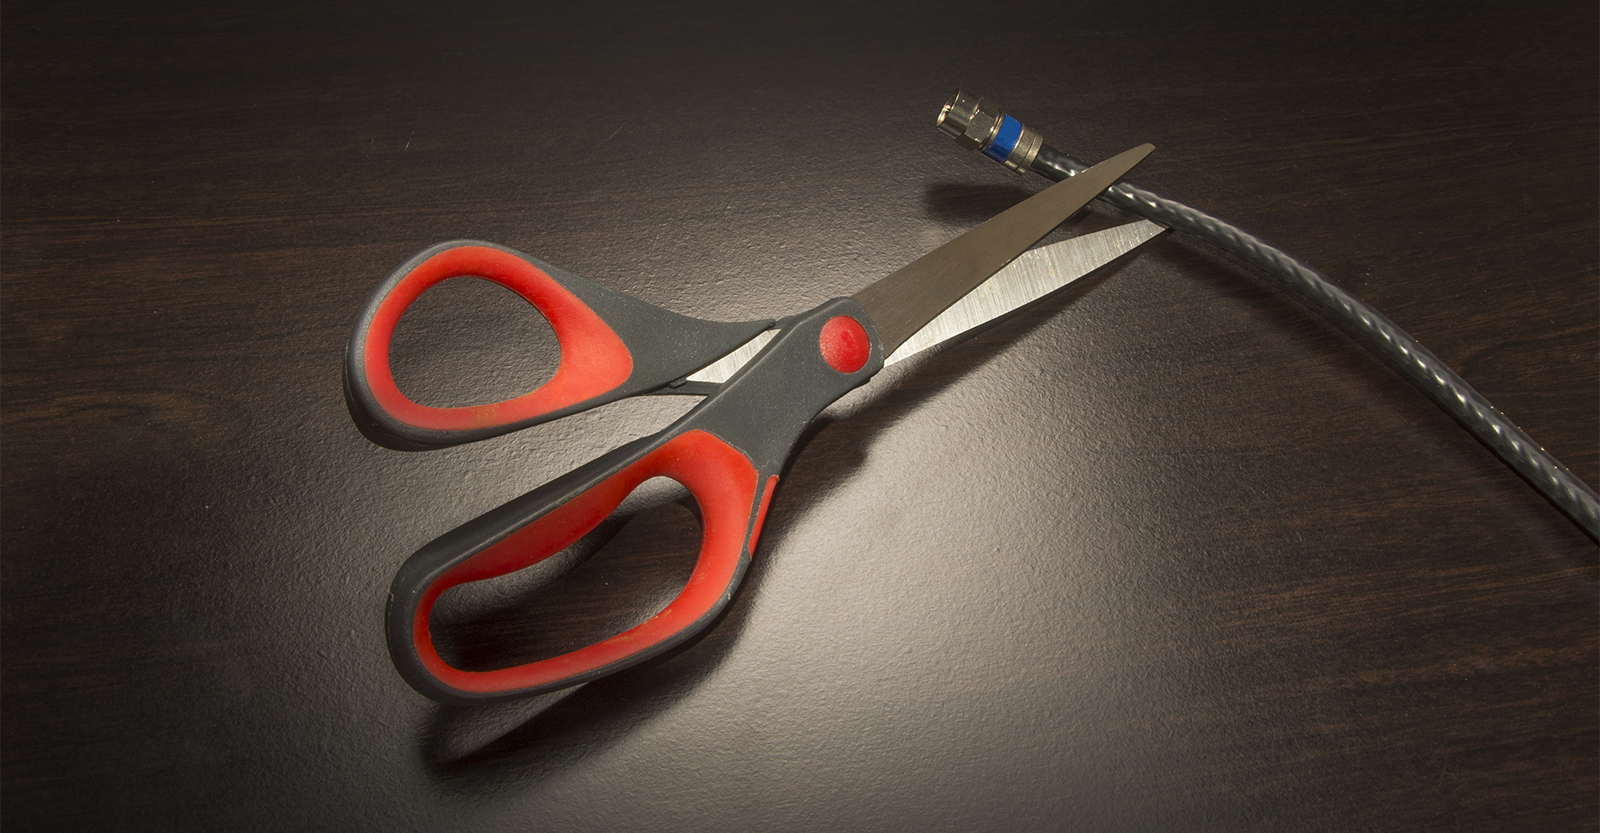 Scissors Cutting Coaxial Cable